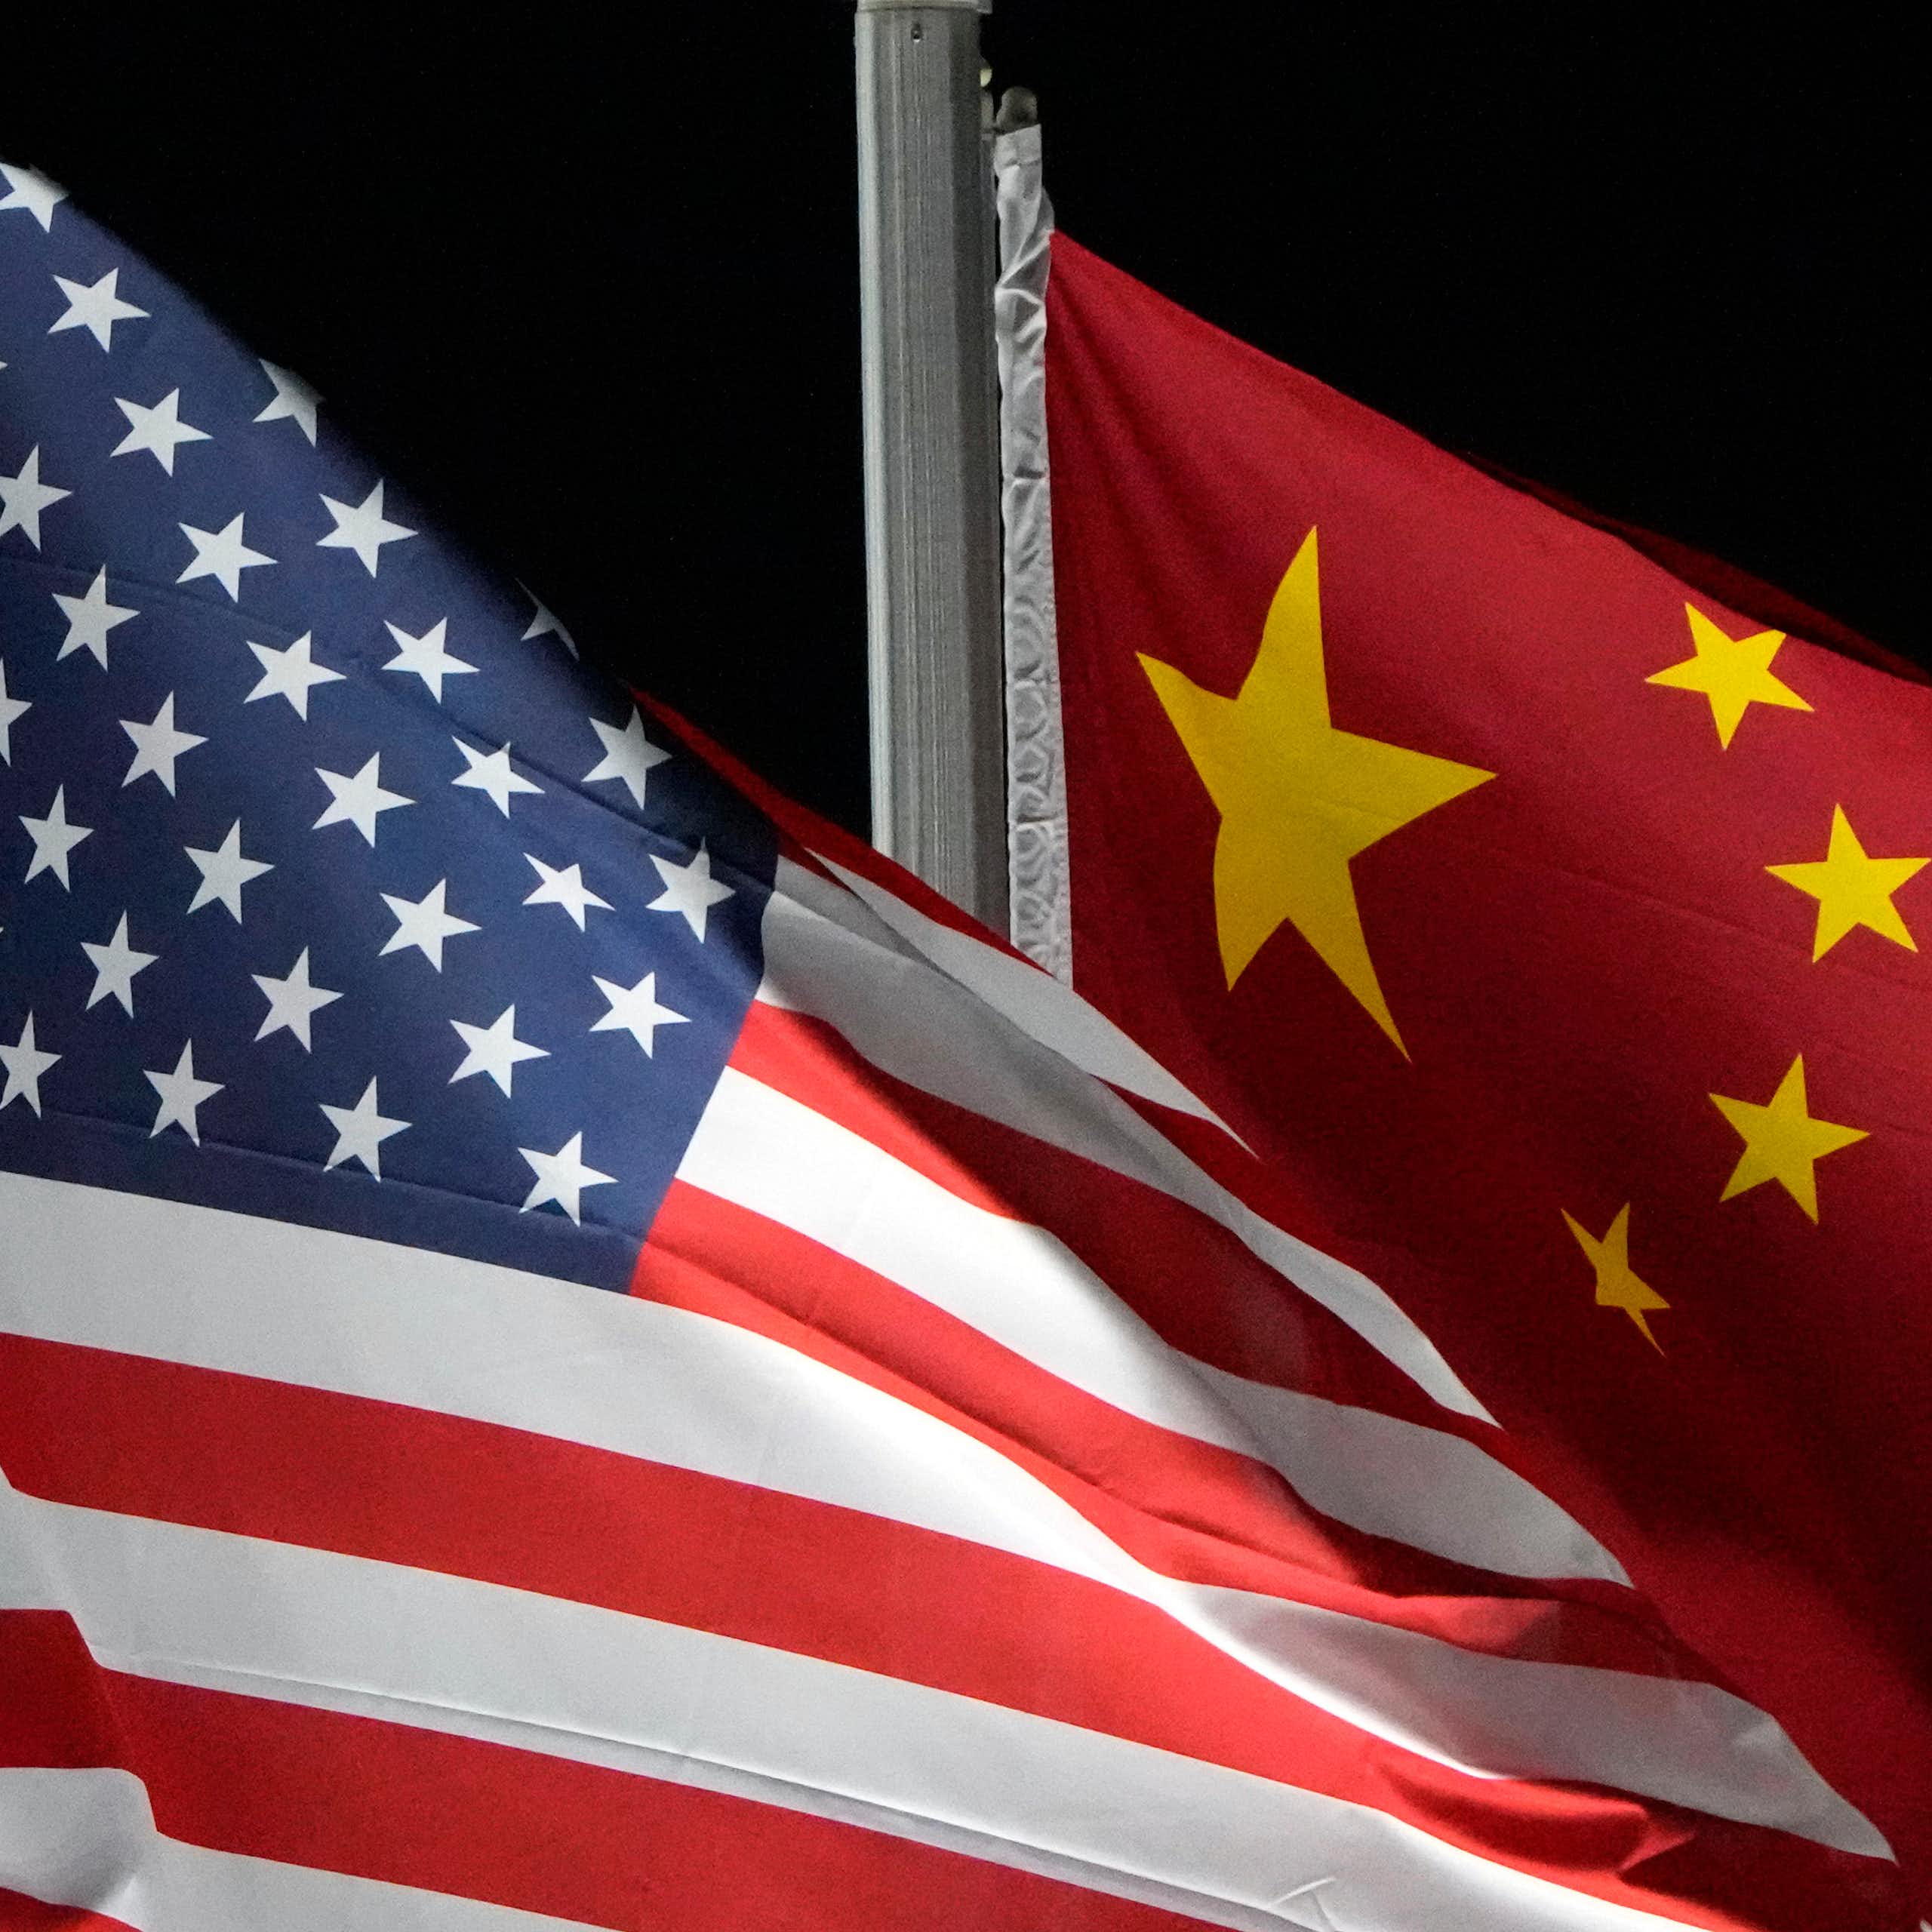 the US and People's Republic of China flags